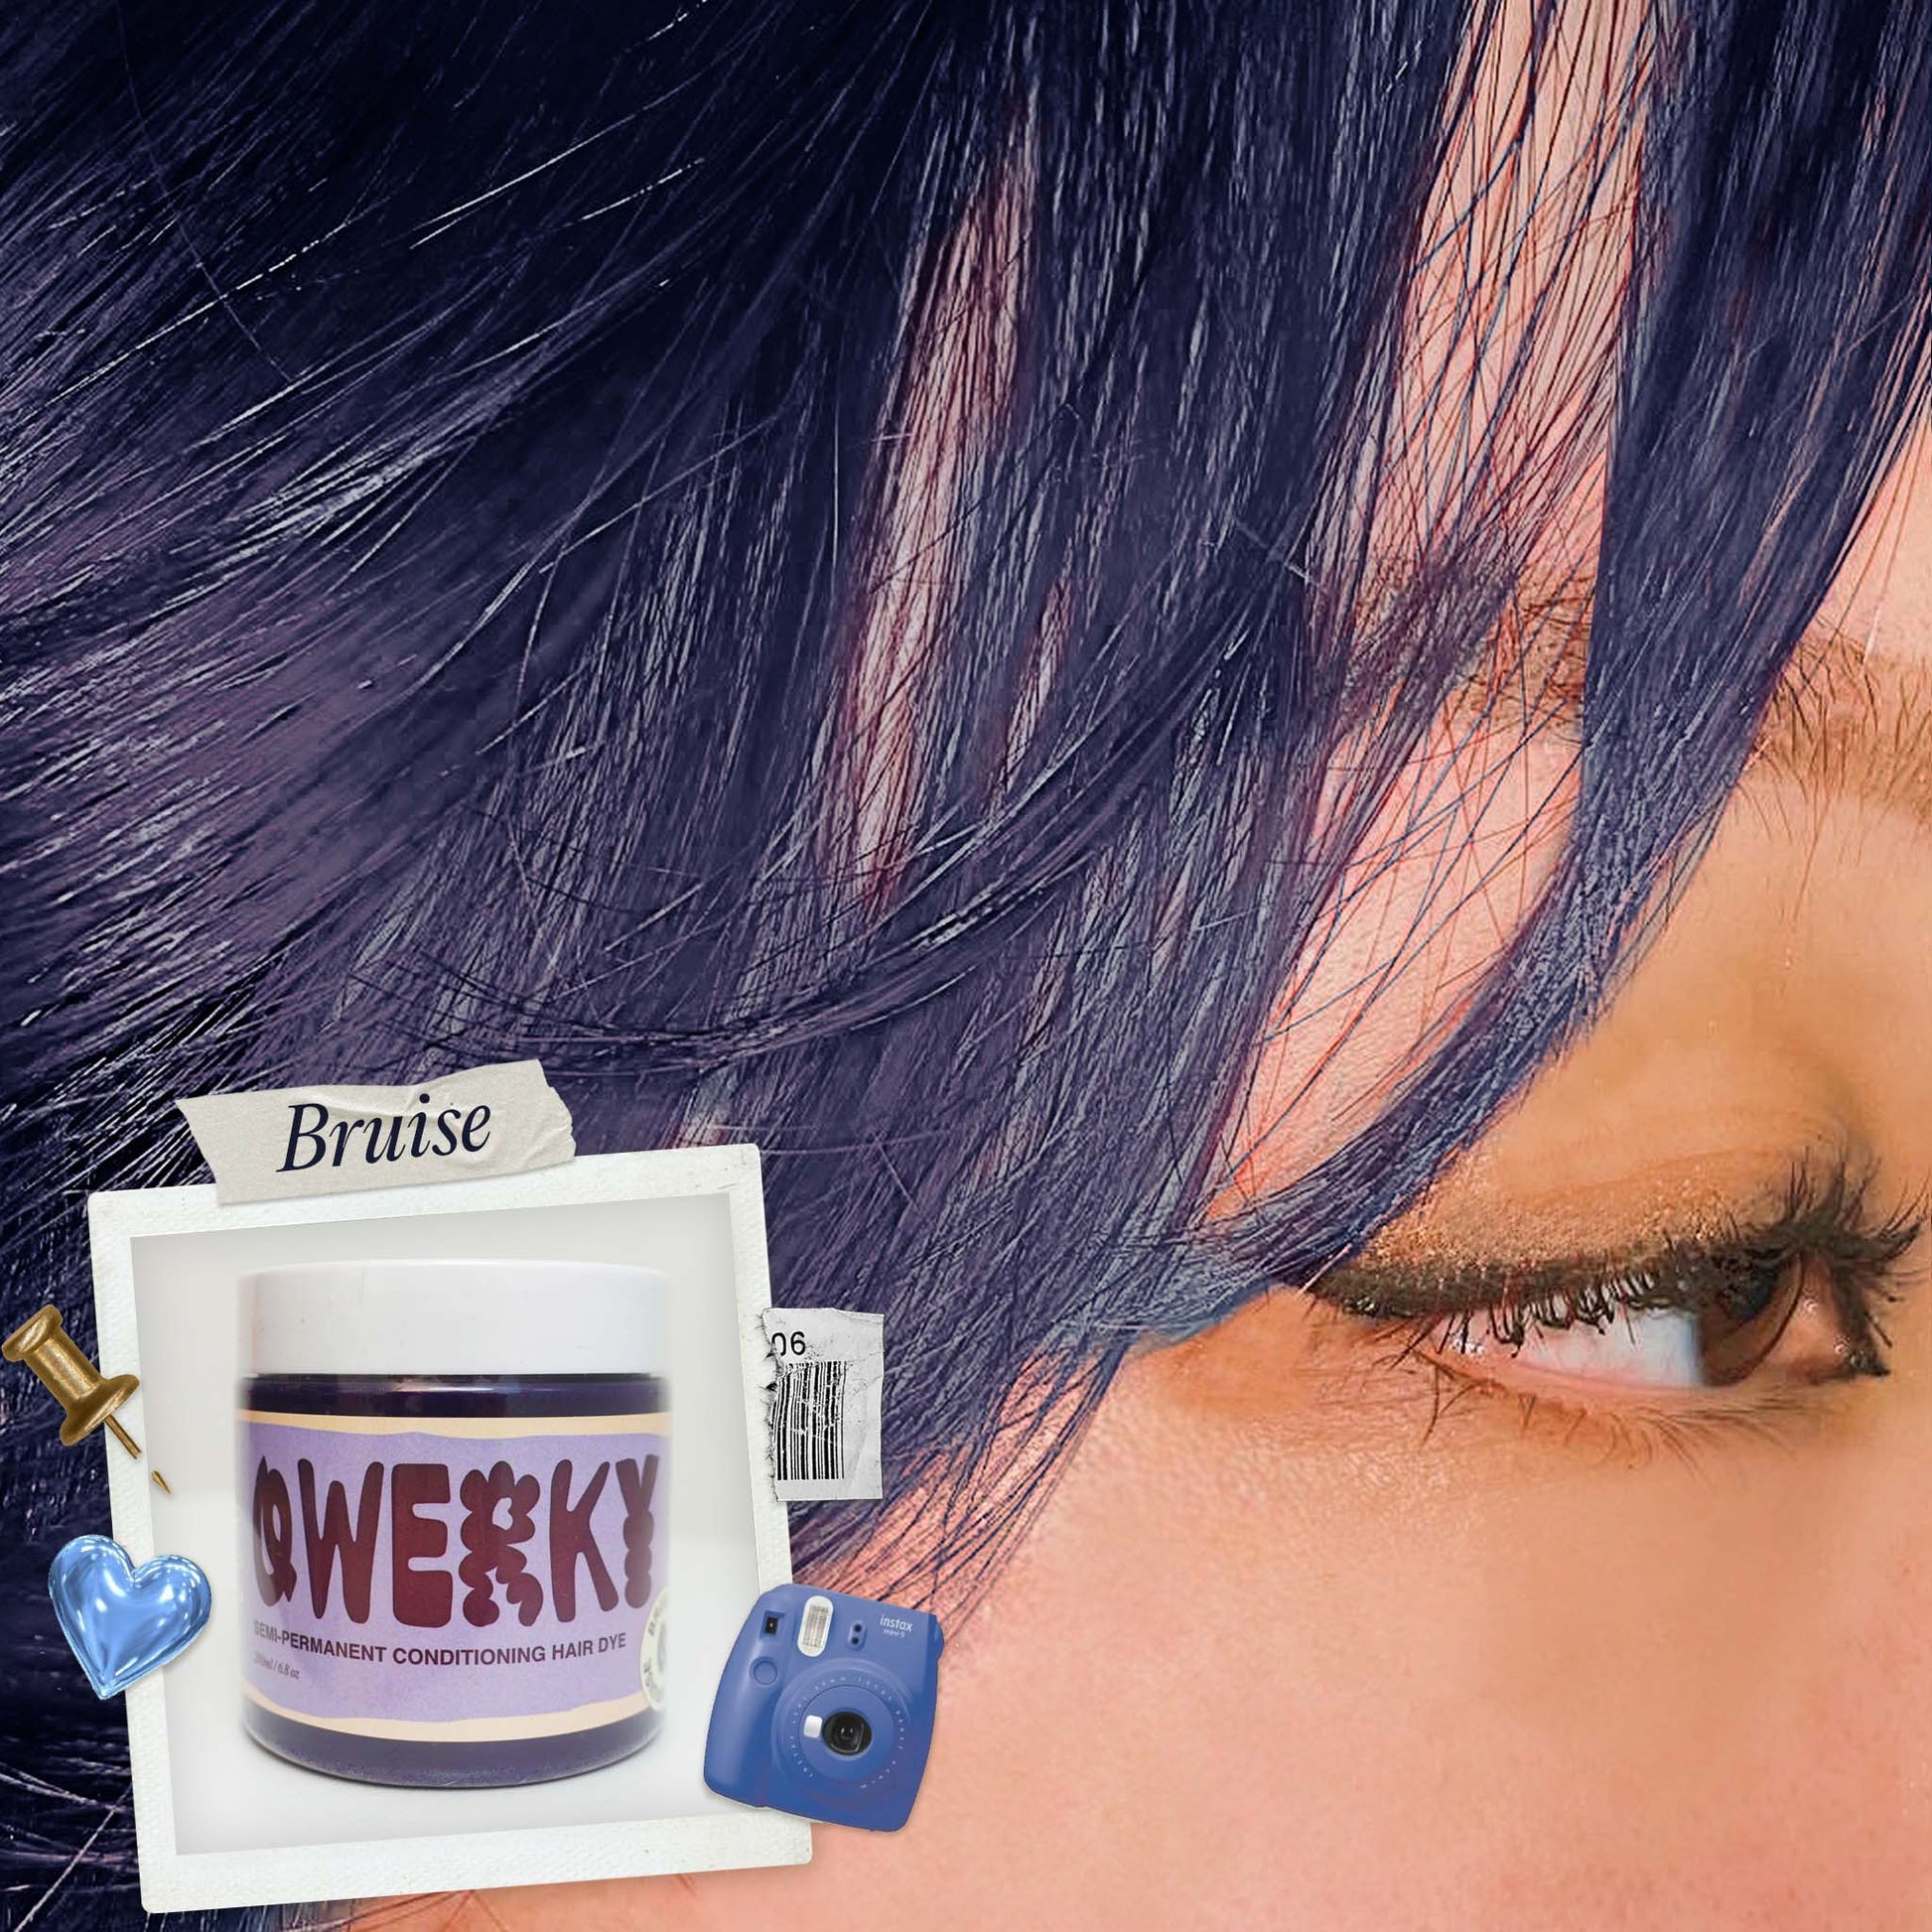 Bruise Semi-Permanent Conditioning Colour - Qwerky Colour